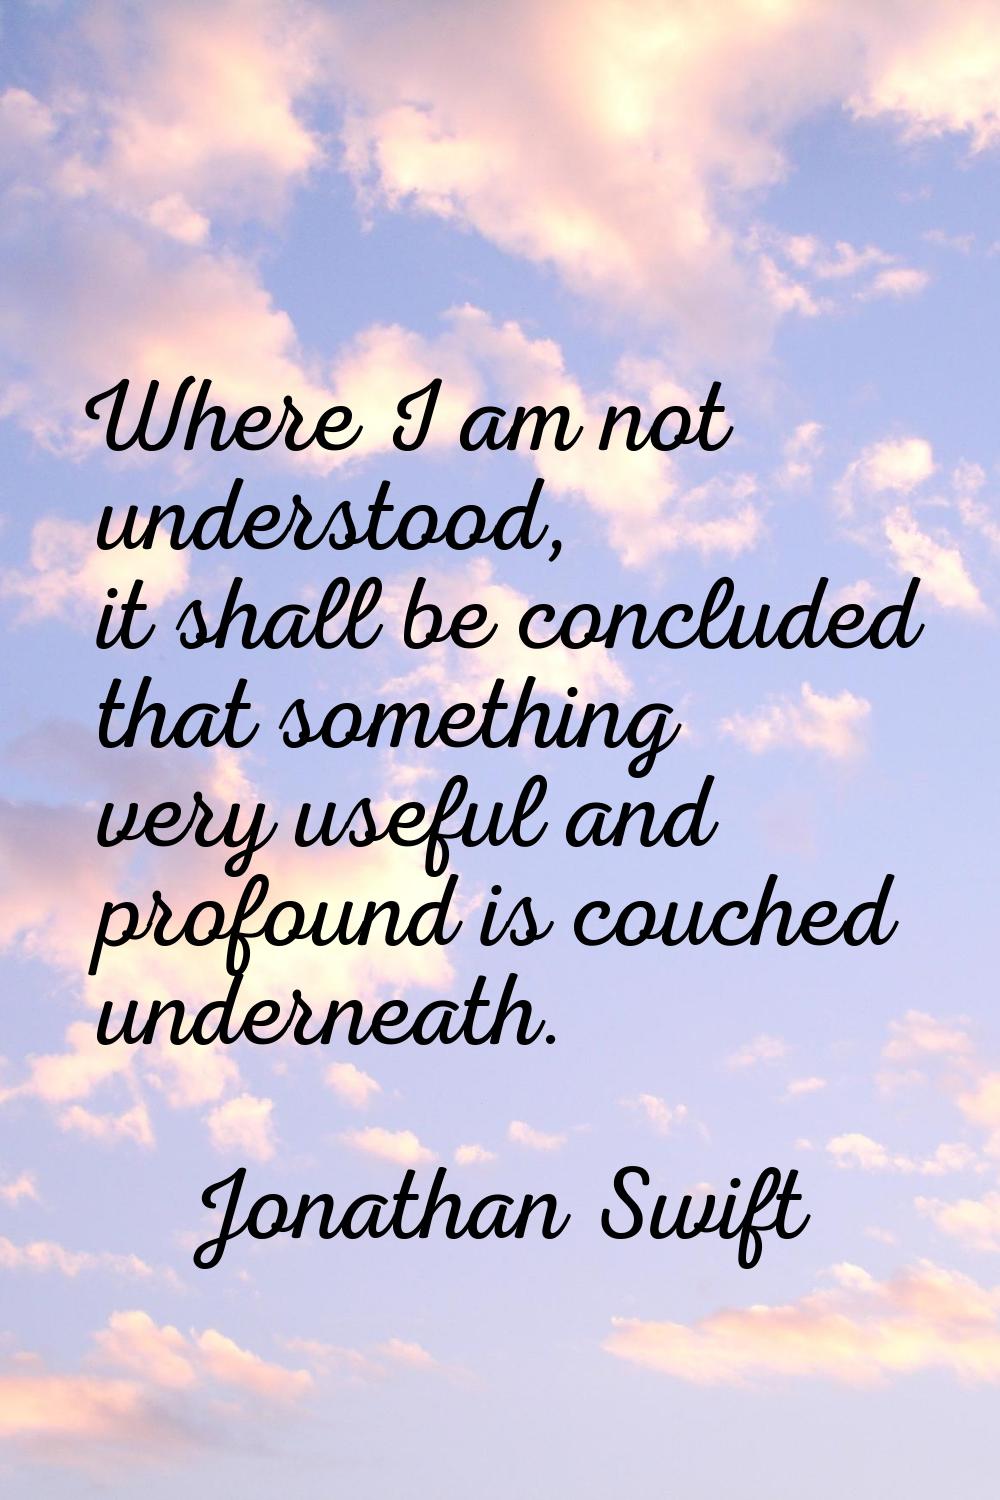 Where I am not understood, it shall be concluded that something very useful and profound is couched